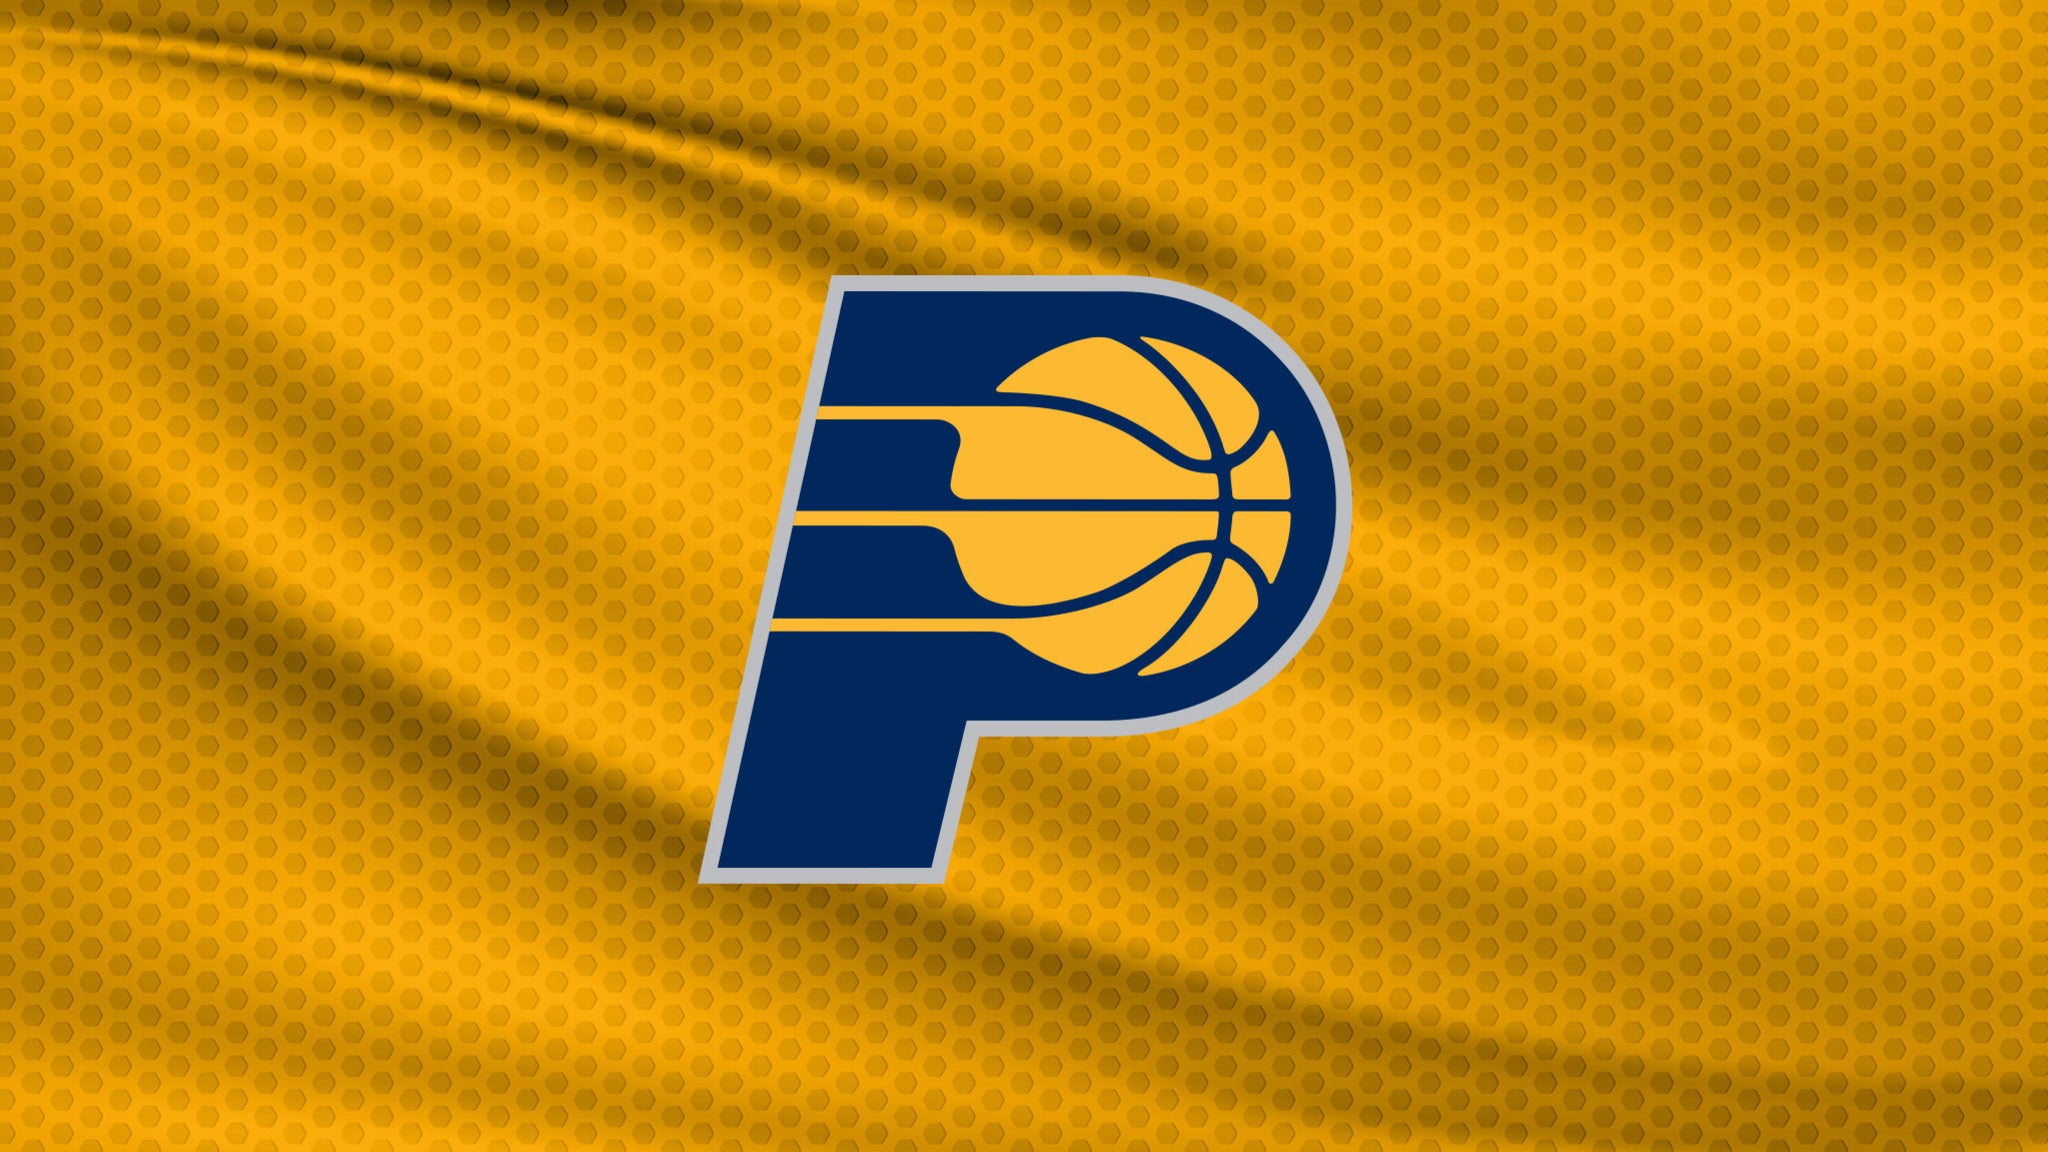 Indiana Pacers vs. Los Angeles Lakers